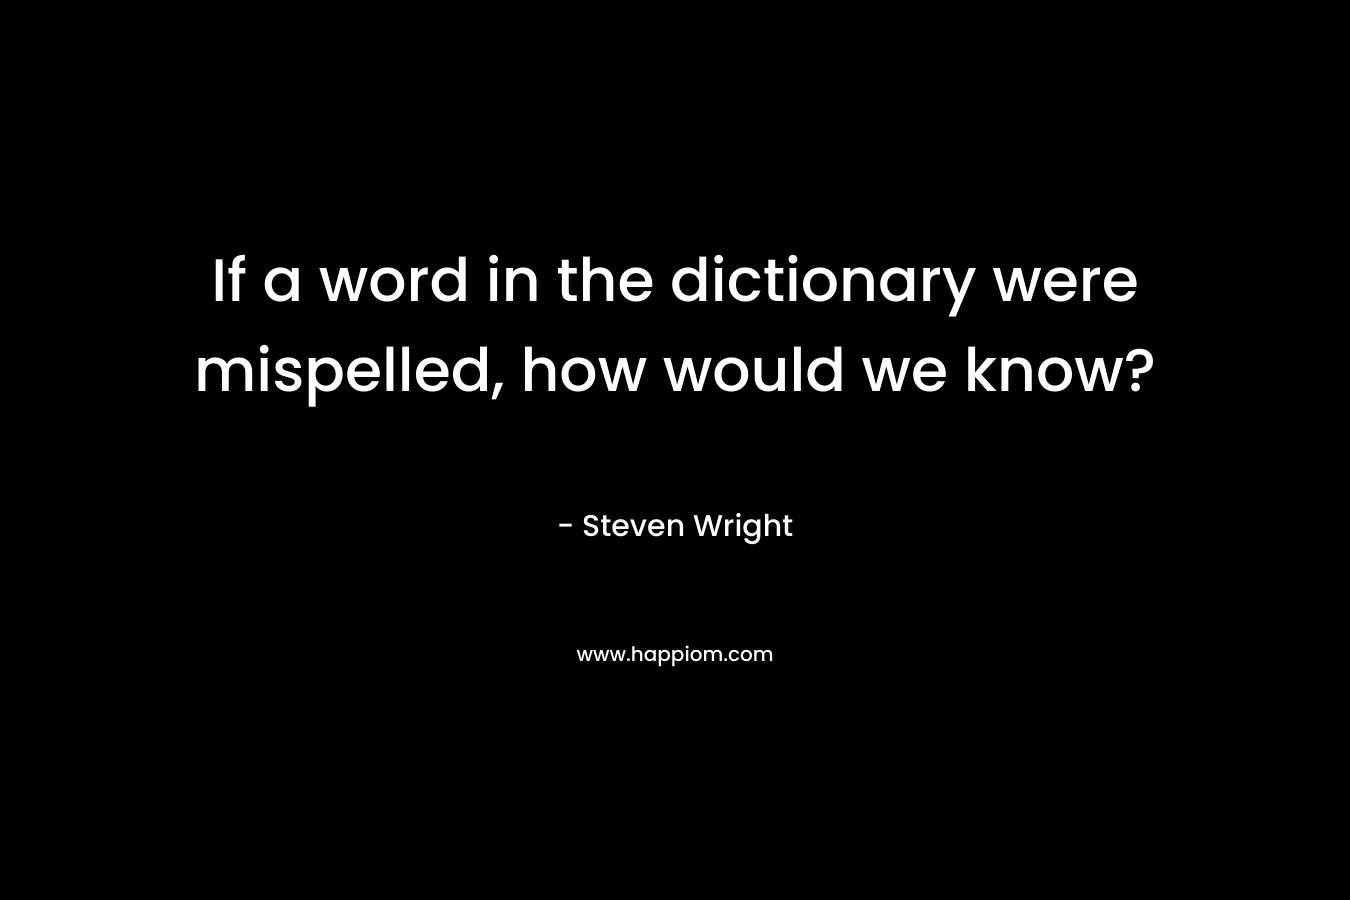 If a word in the dictionary were mispelled, how would we know?